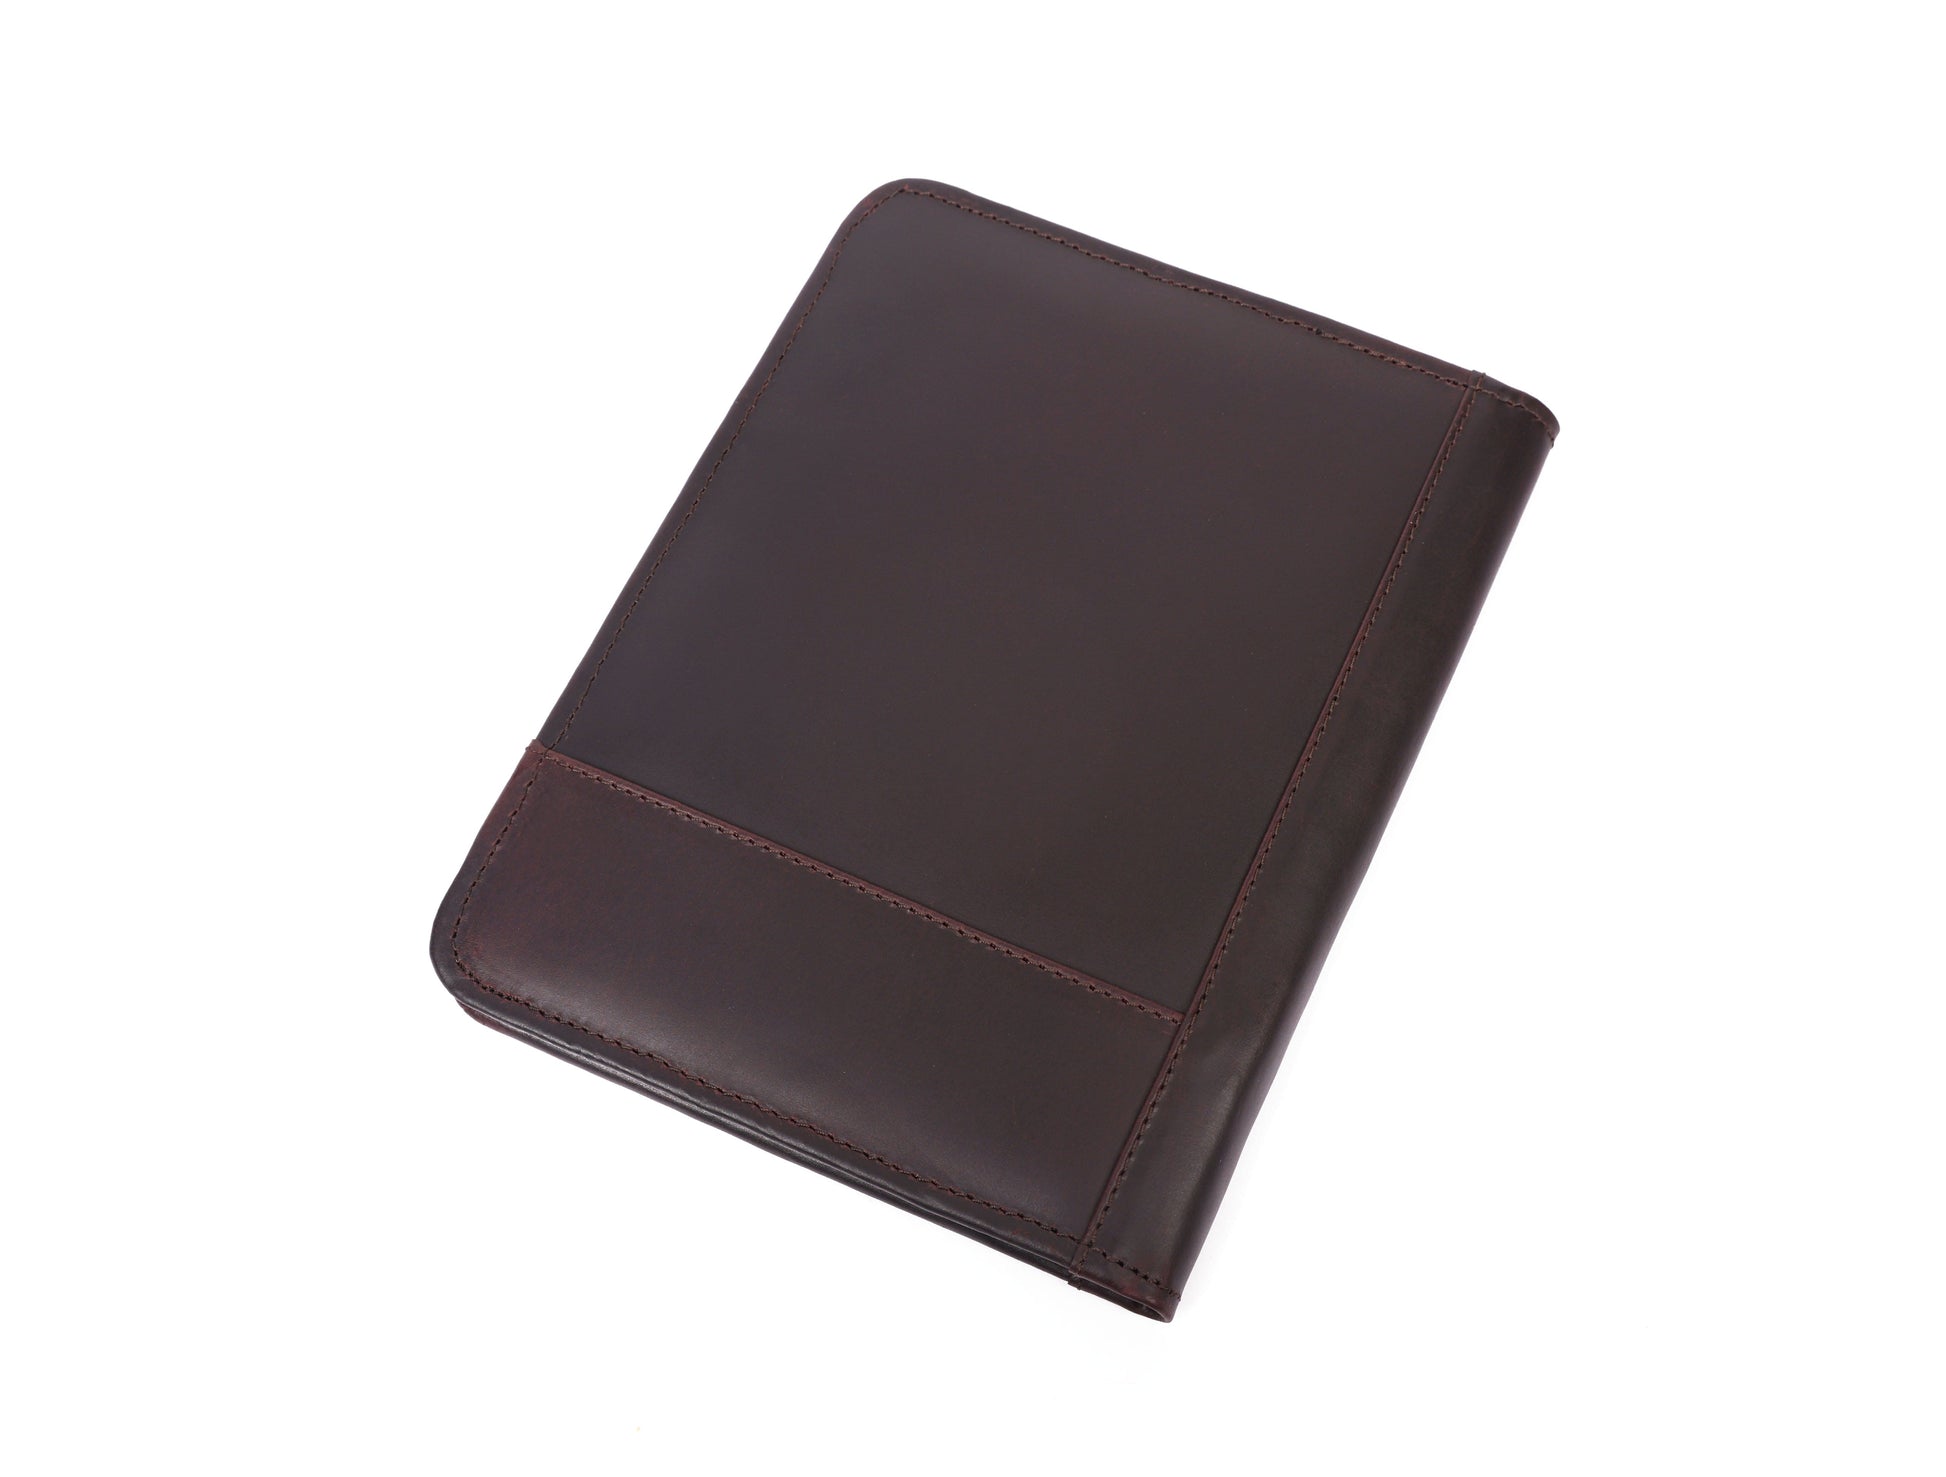 Premium Leather Diary Cover with Spacious Compartments for Pens and Accessories - CELTICINDIA